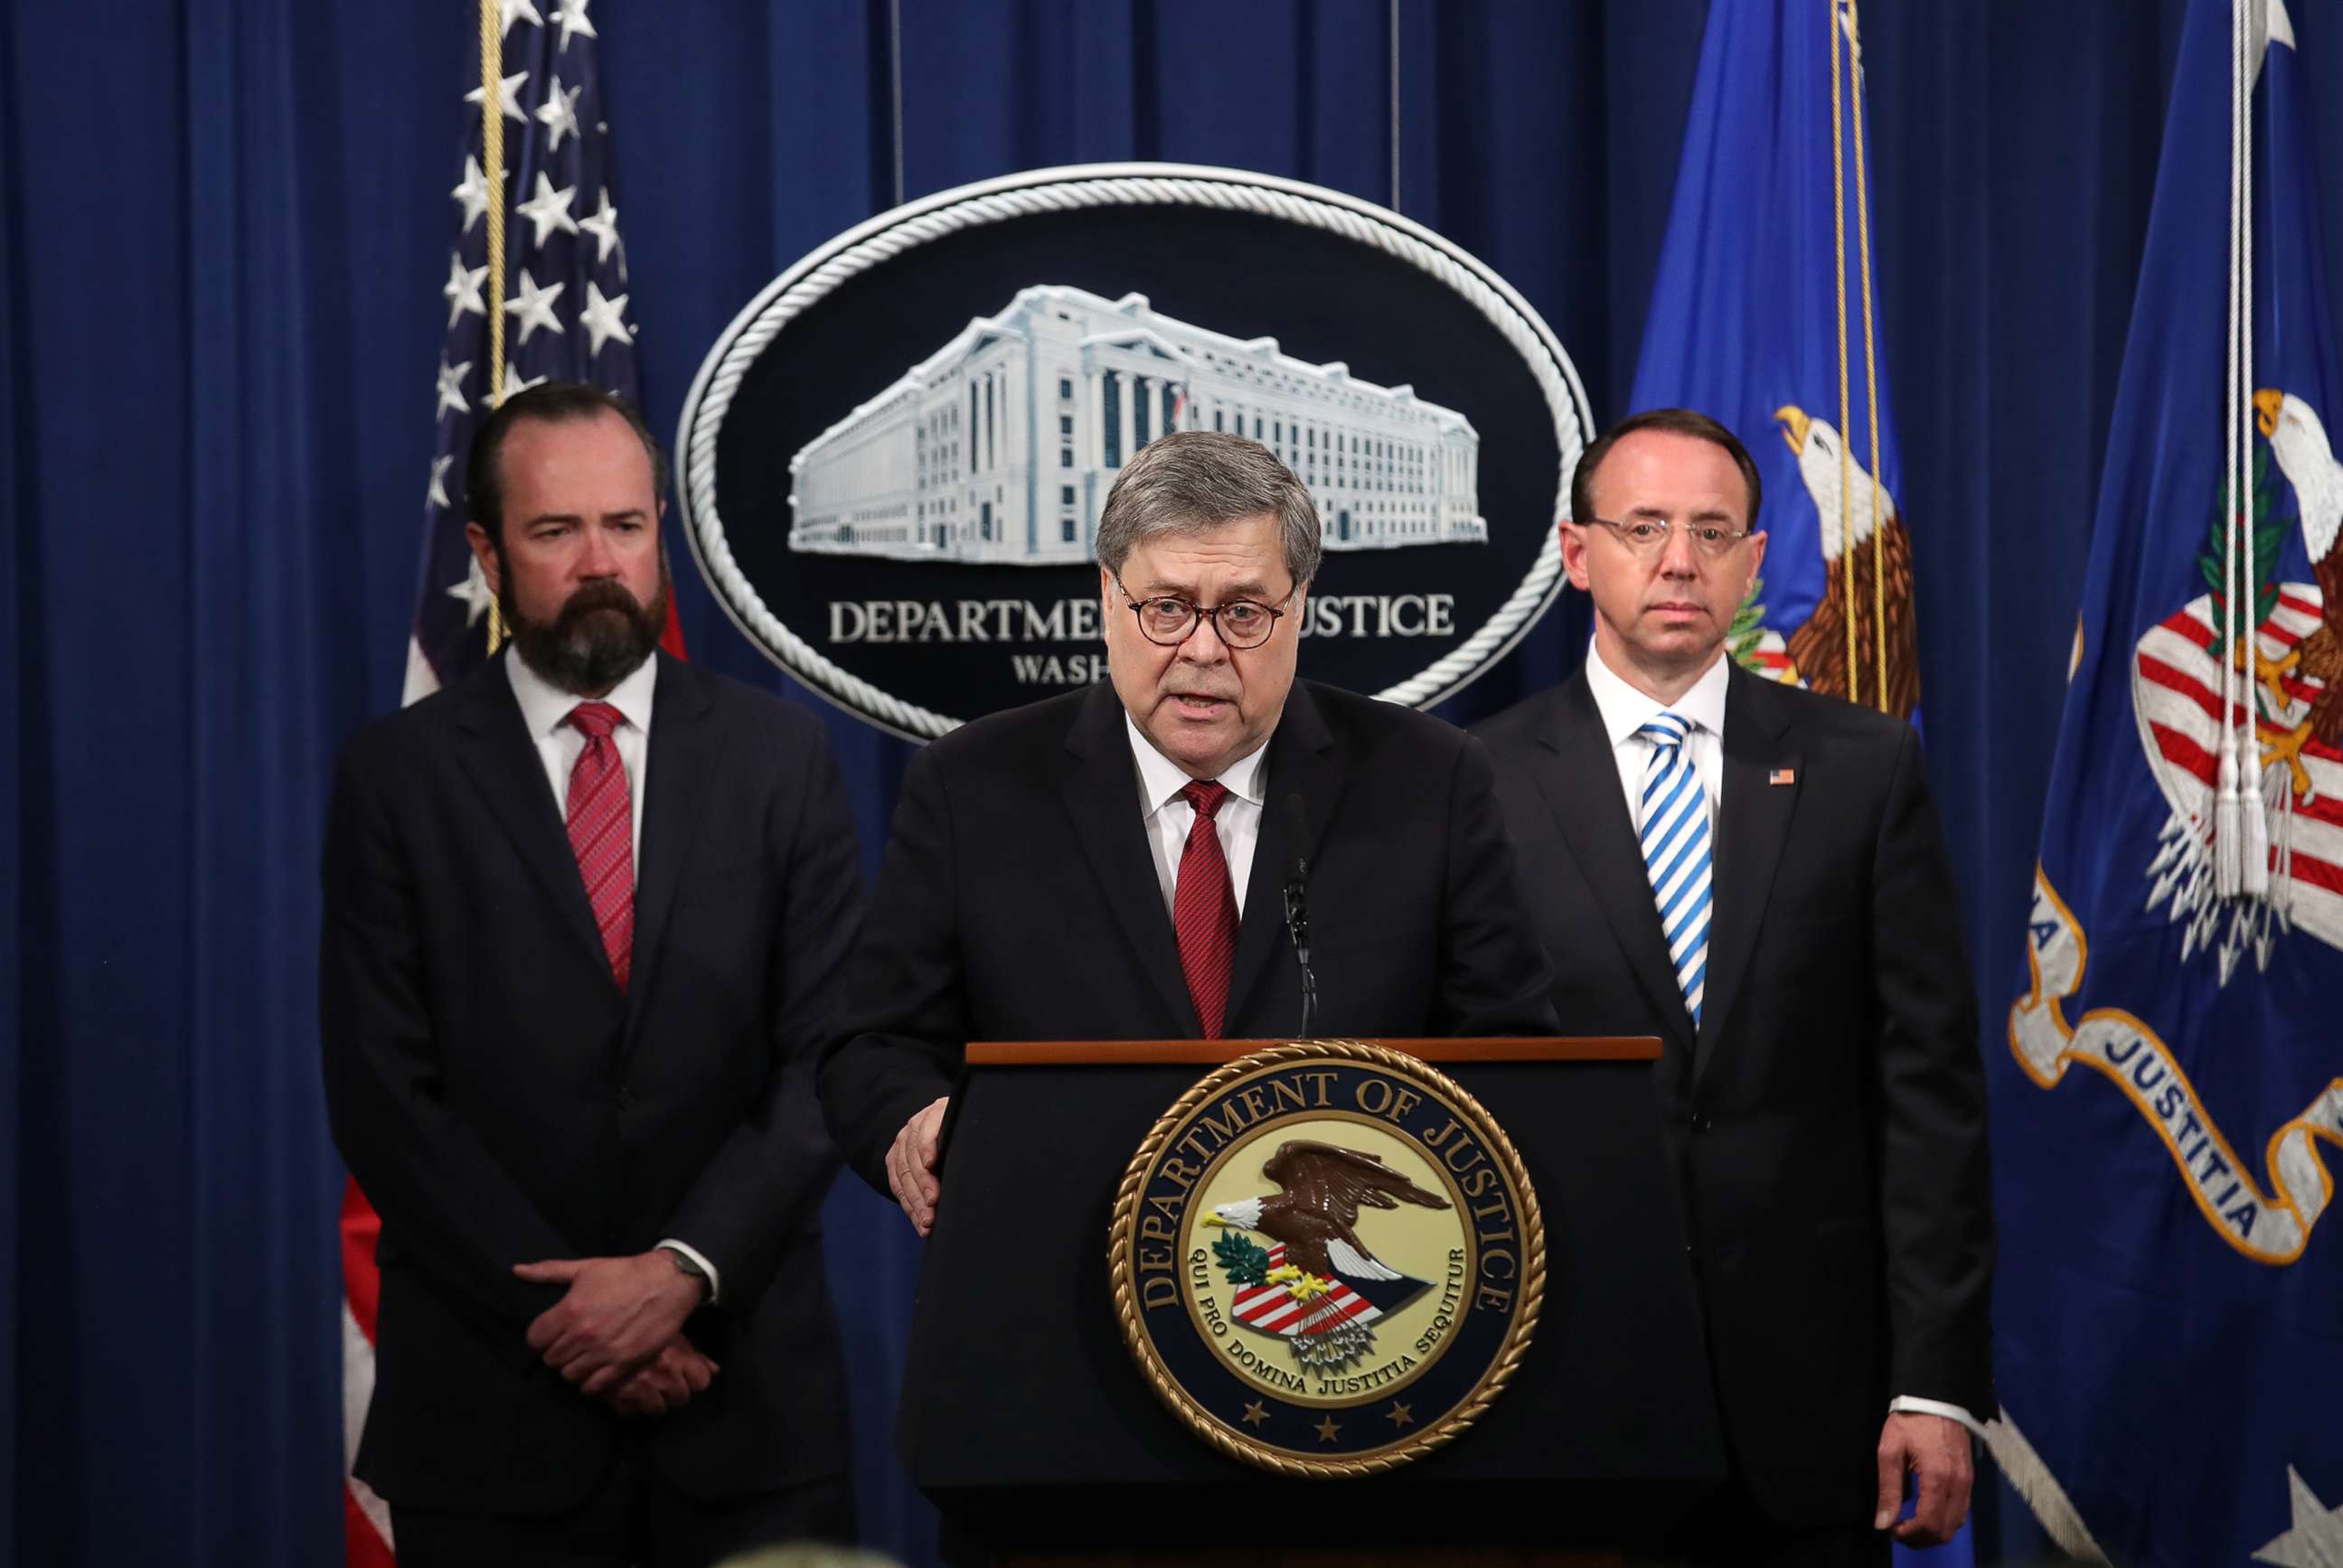 PHOTO: U.S. Attorney General William Barr speaks about the release of the redacted version of the Mueller report at the Department of Justice, April 18, 2019, in Washington, D.C.